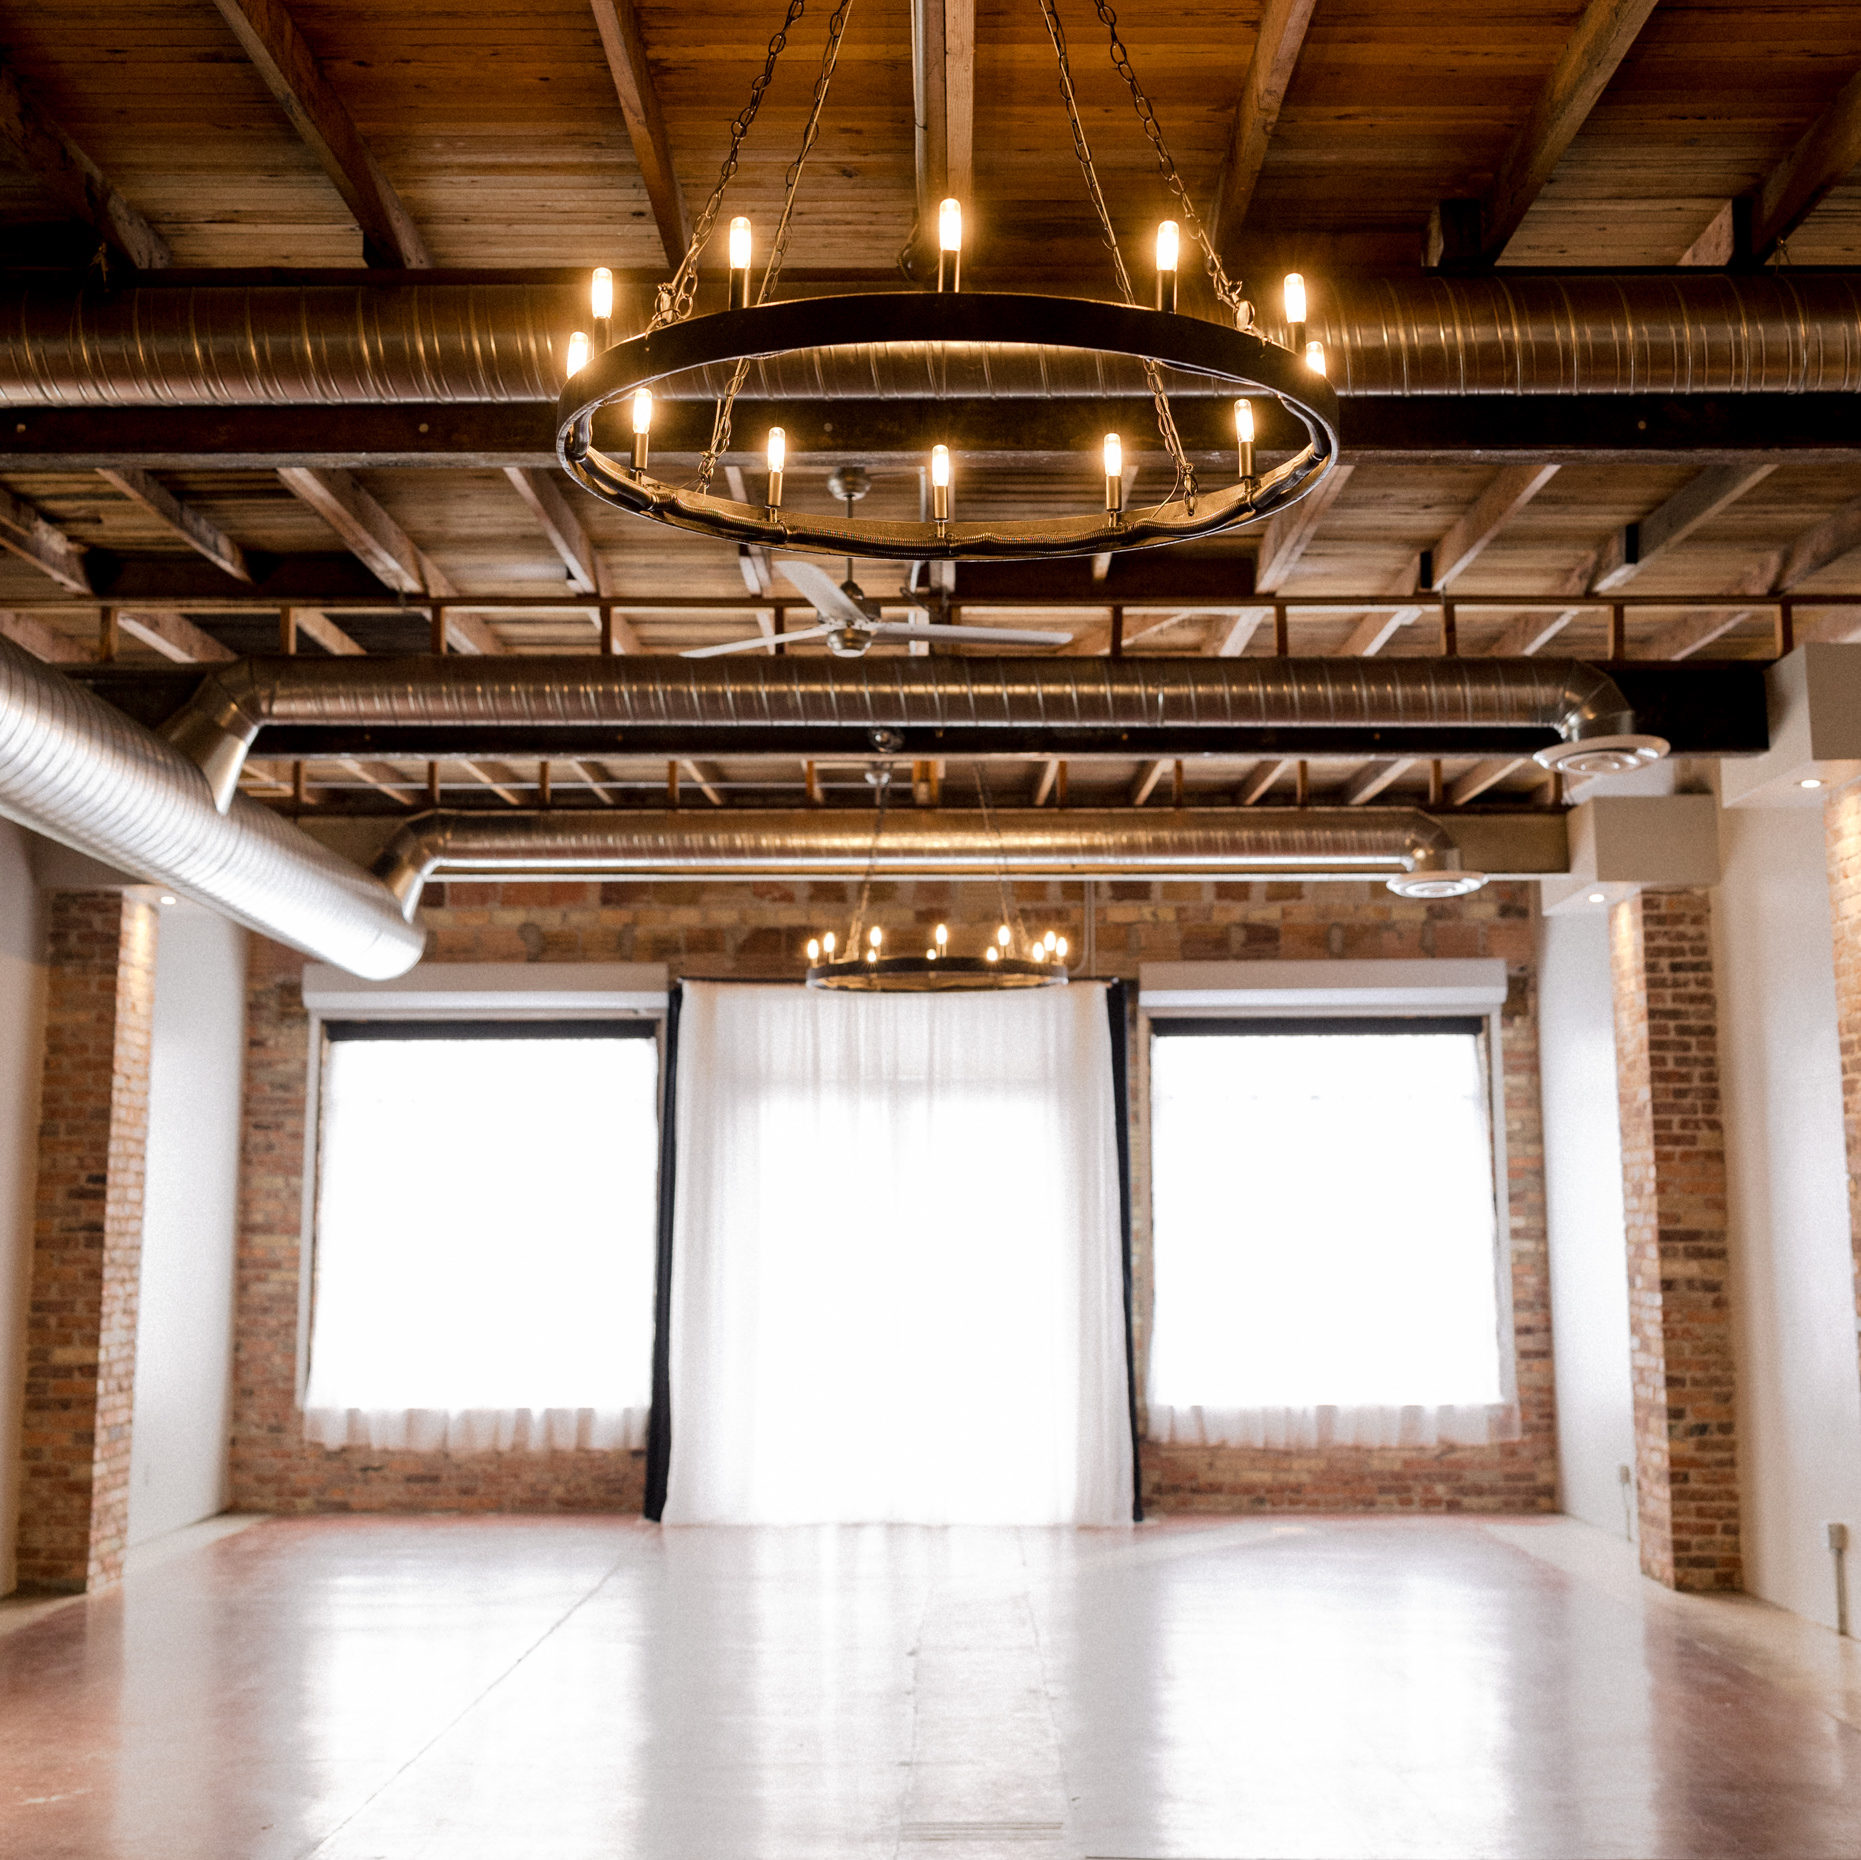 A large empty space with floor to ceiling windows, brick walls, and light flooding into the space.